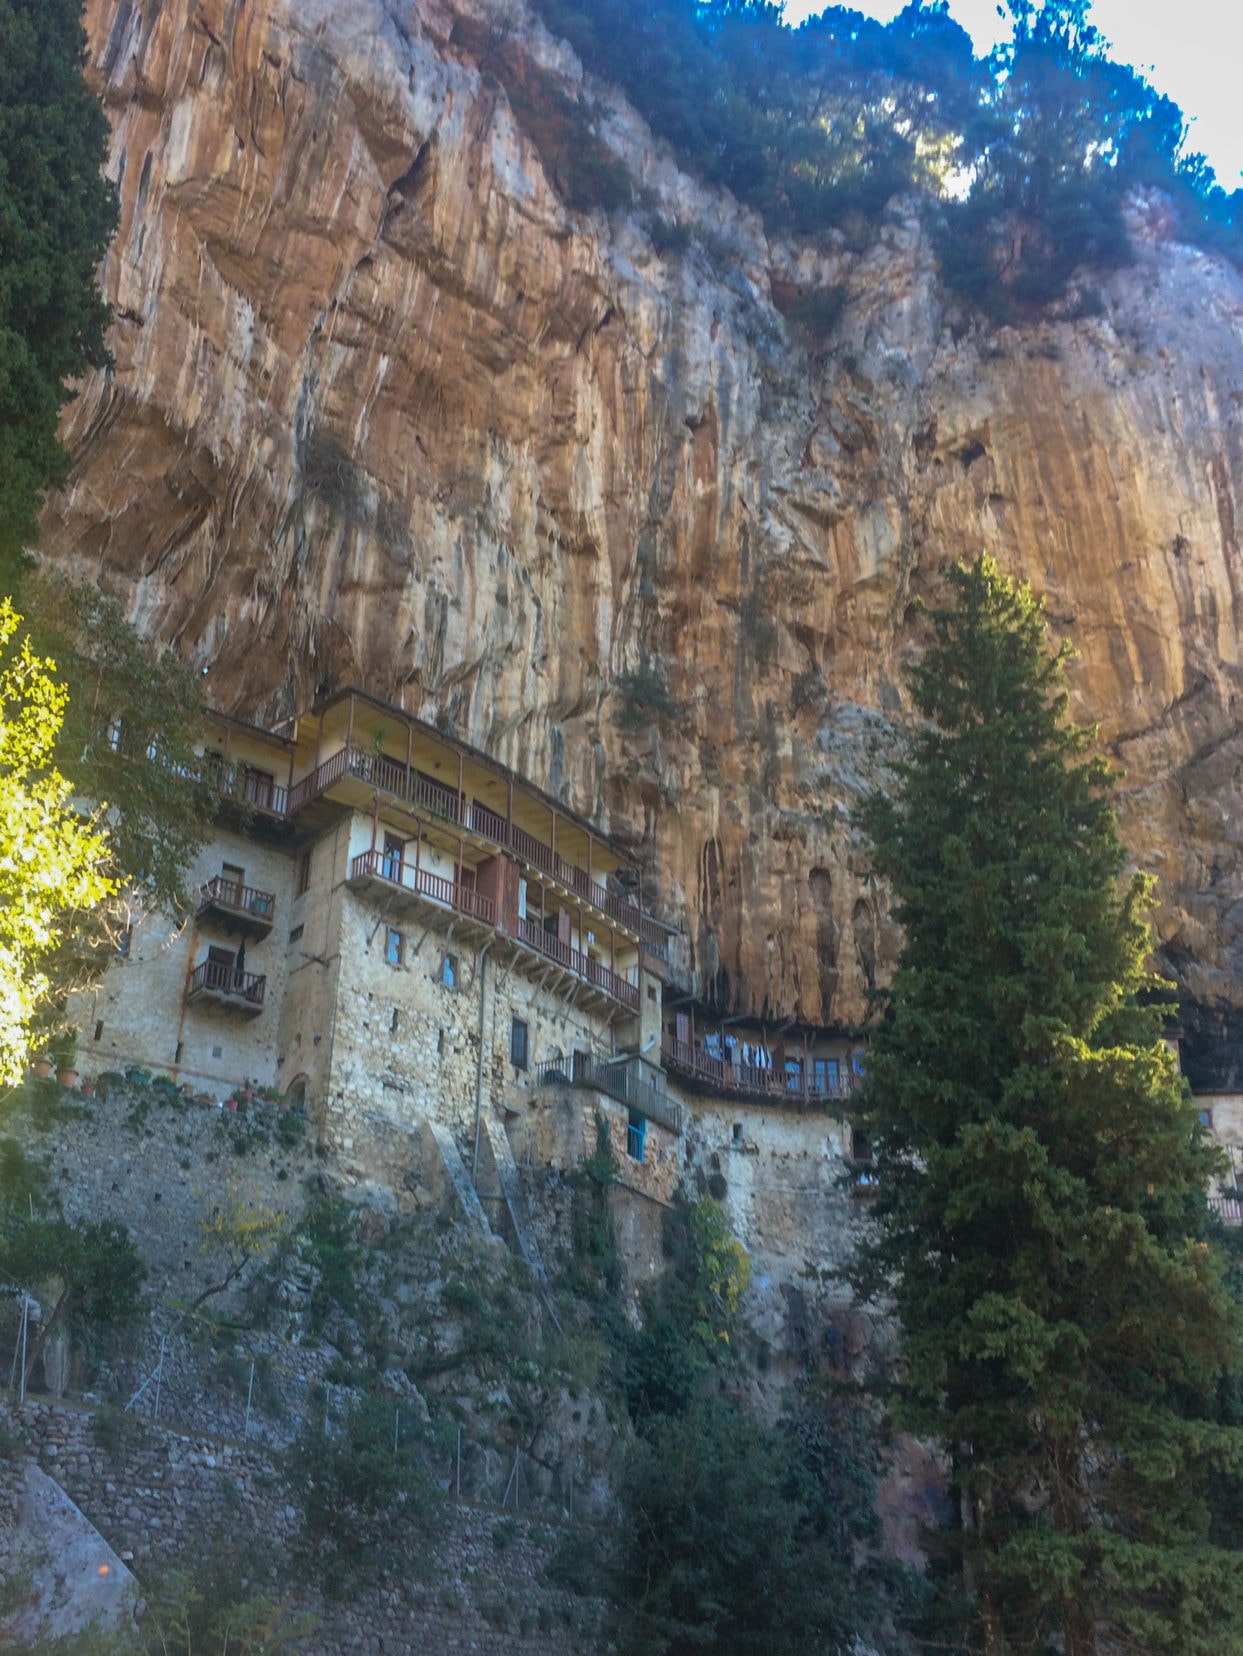 buildings built on the steep side of a rocky mountain